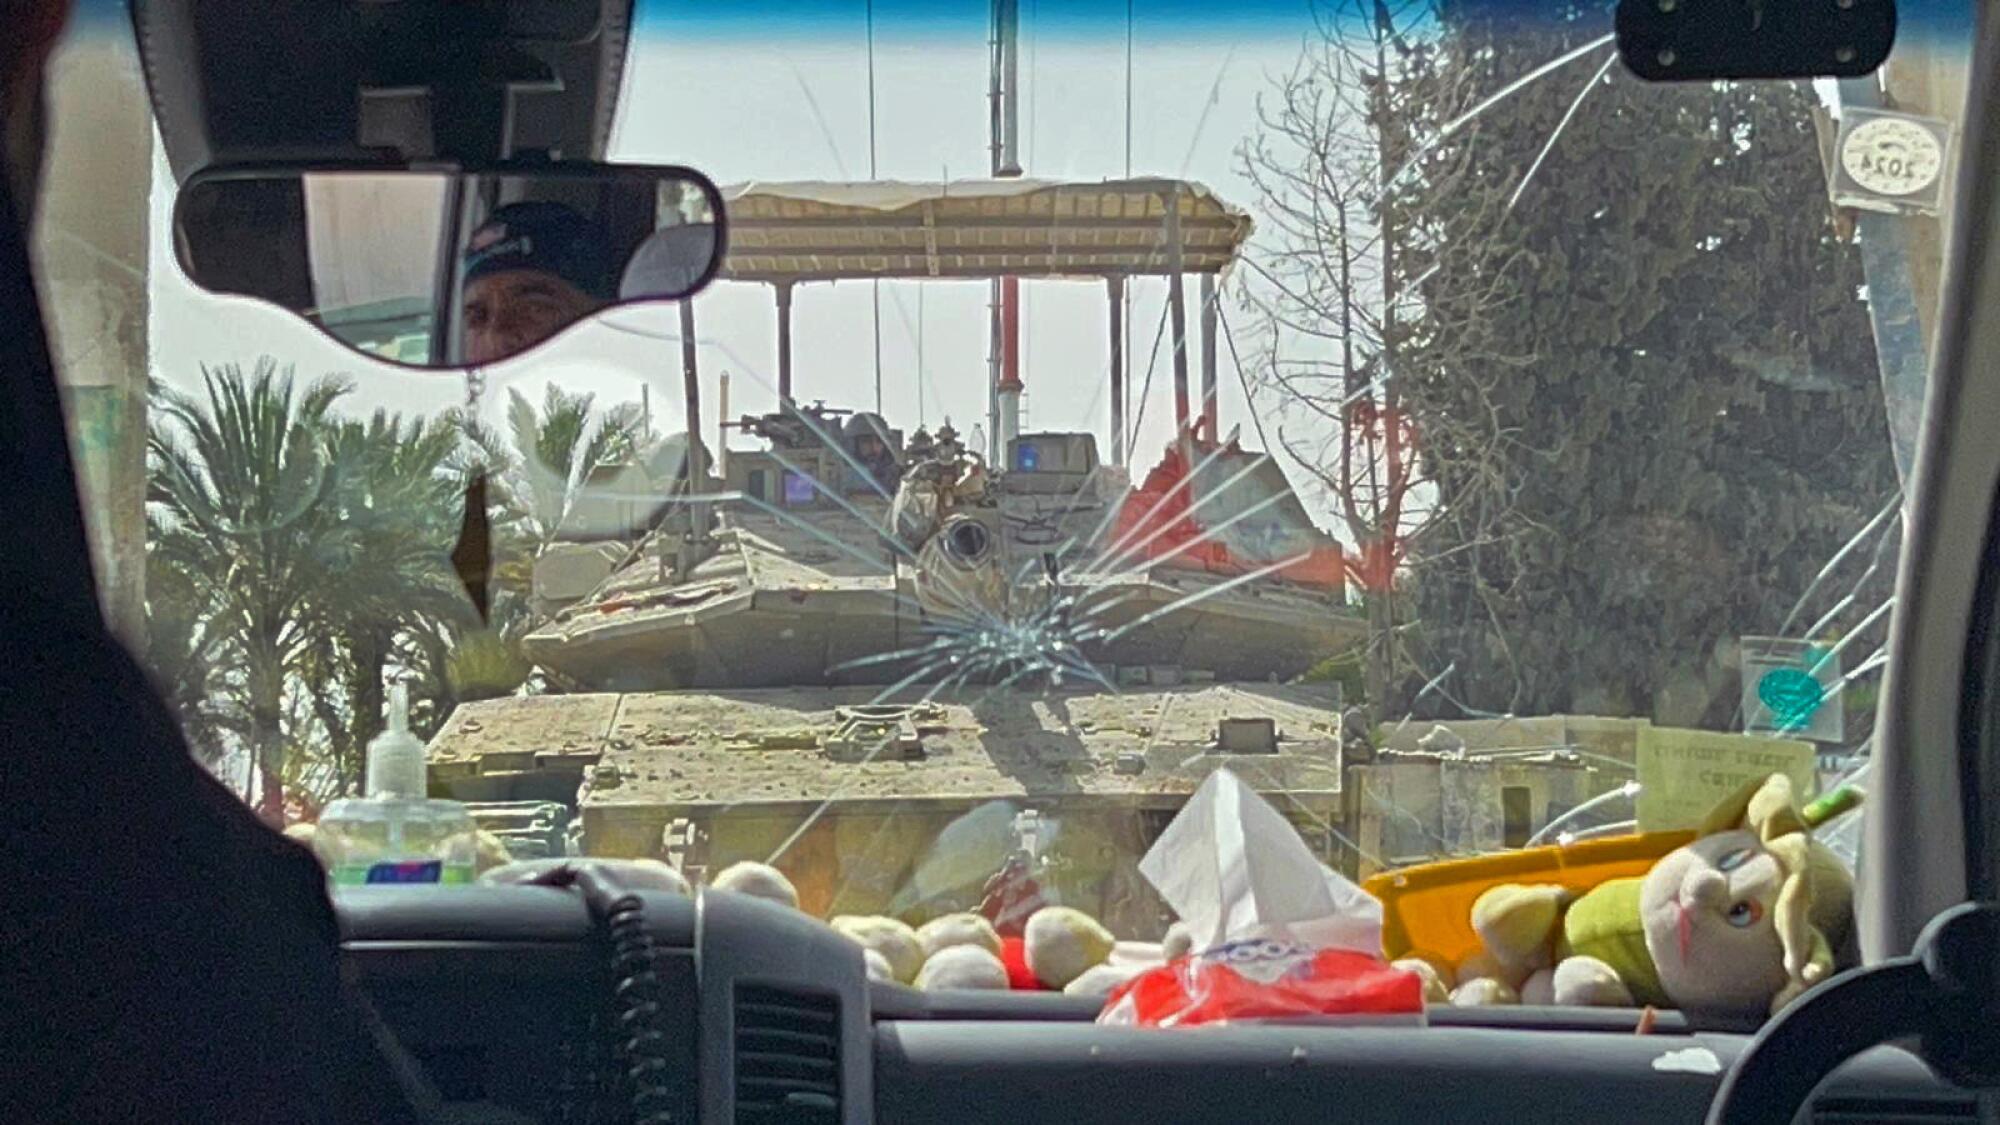 A tank is seen through the window of  a passenger vehicle.